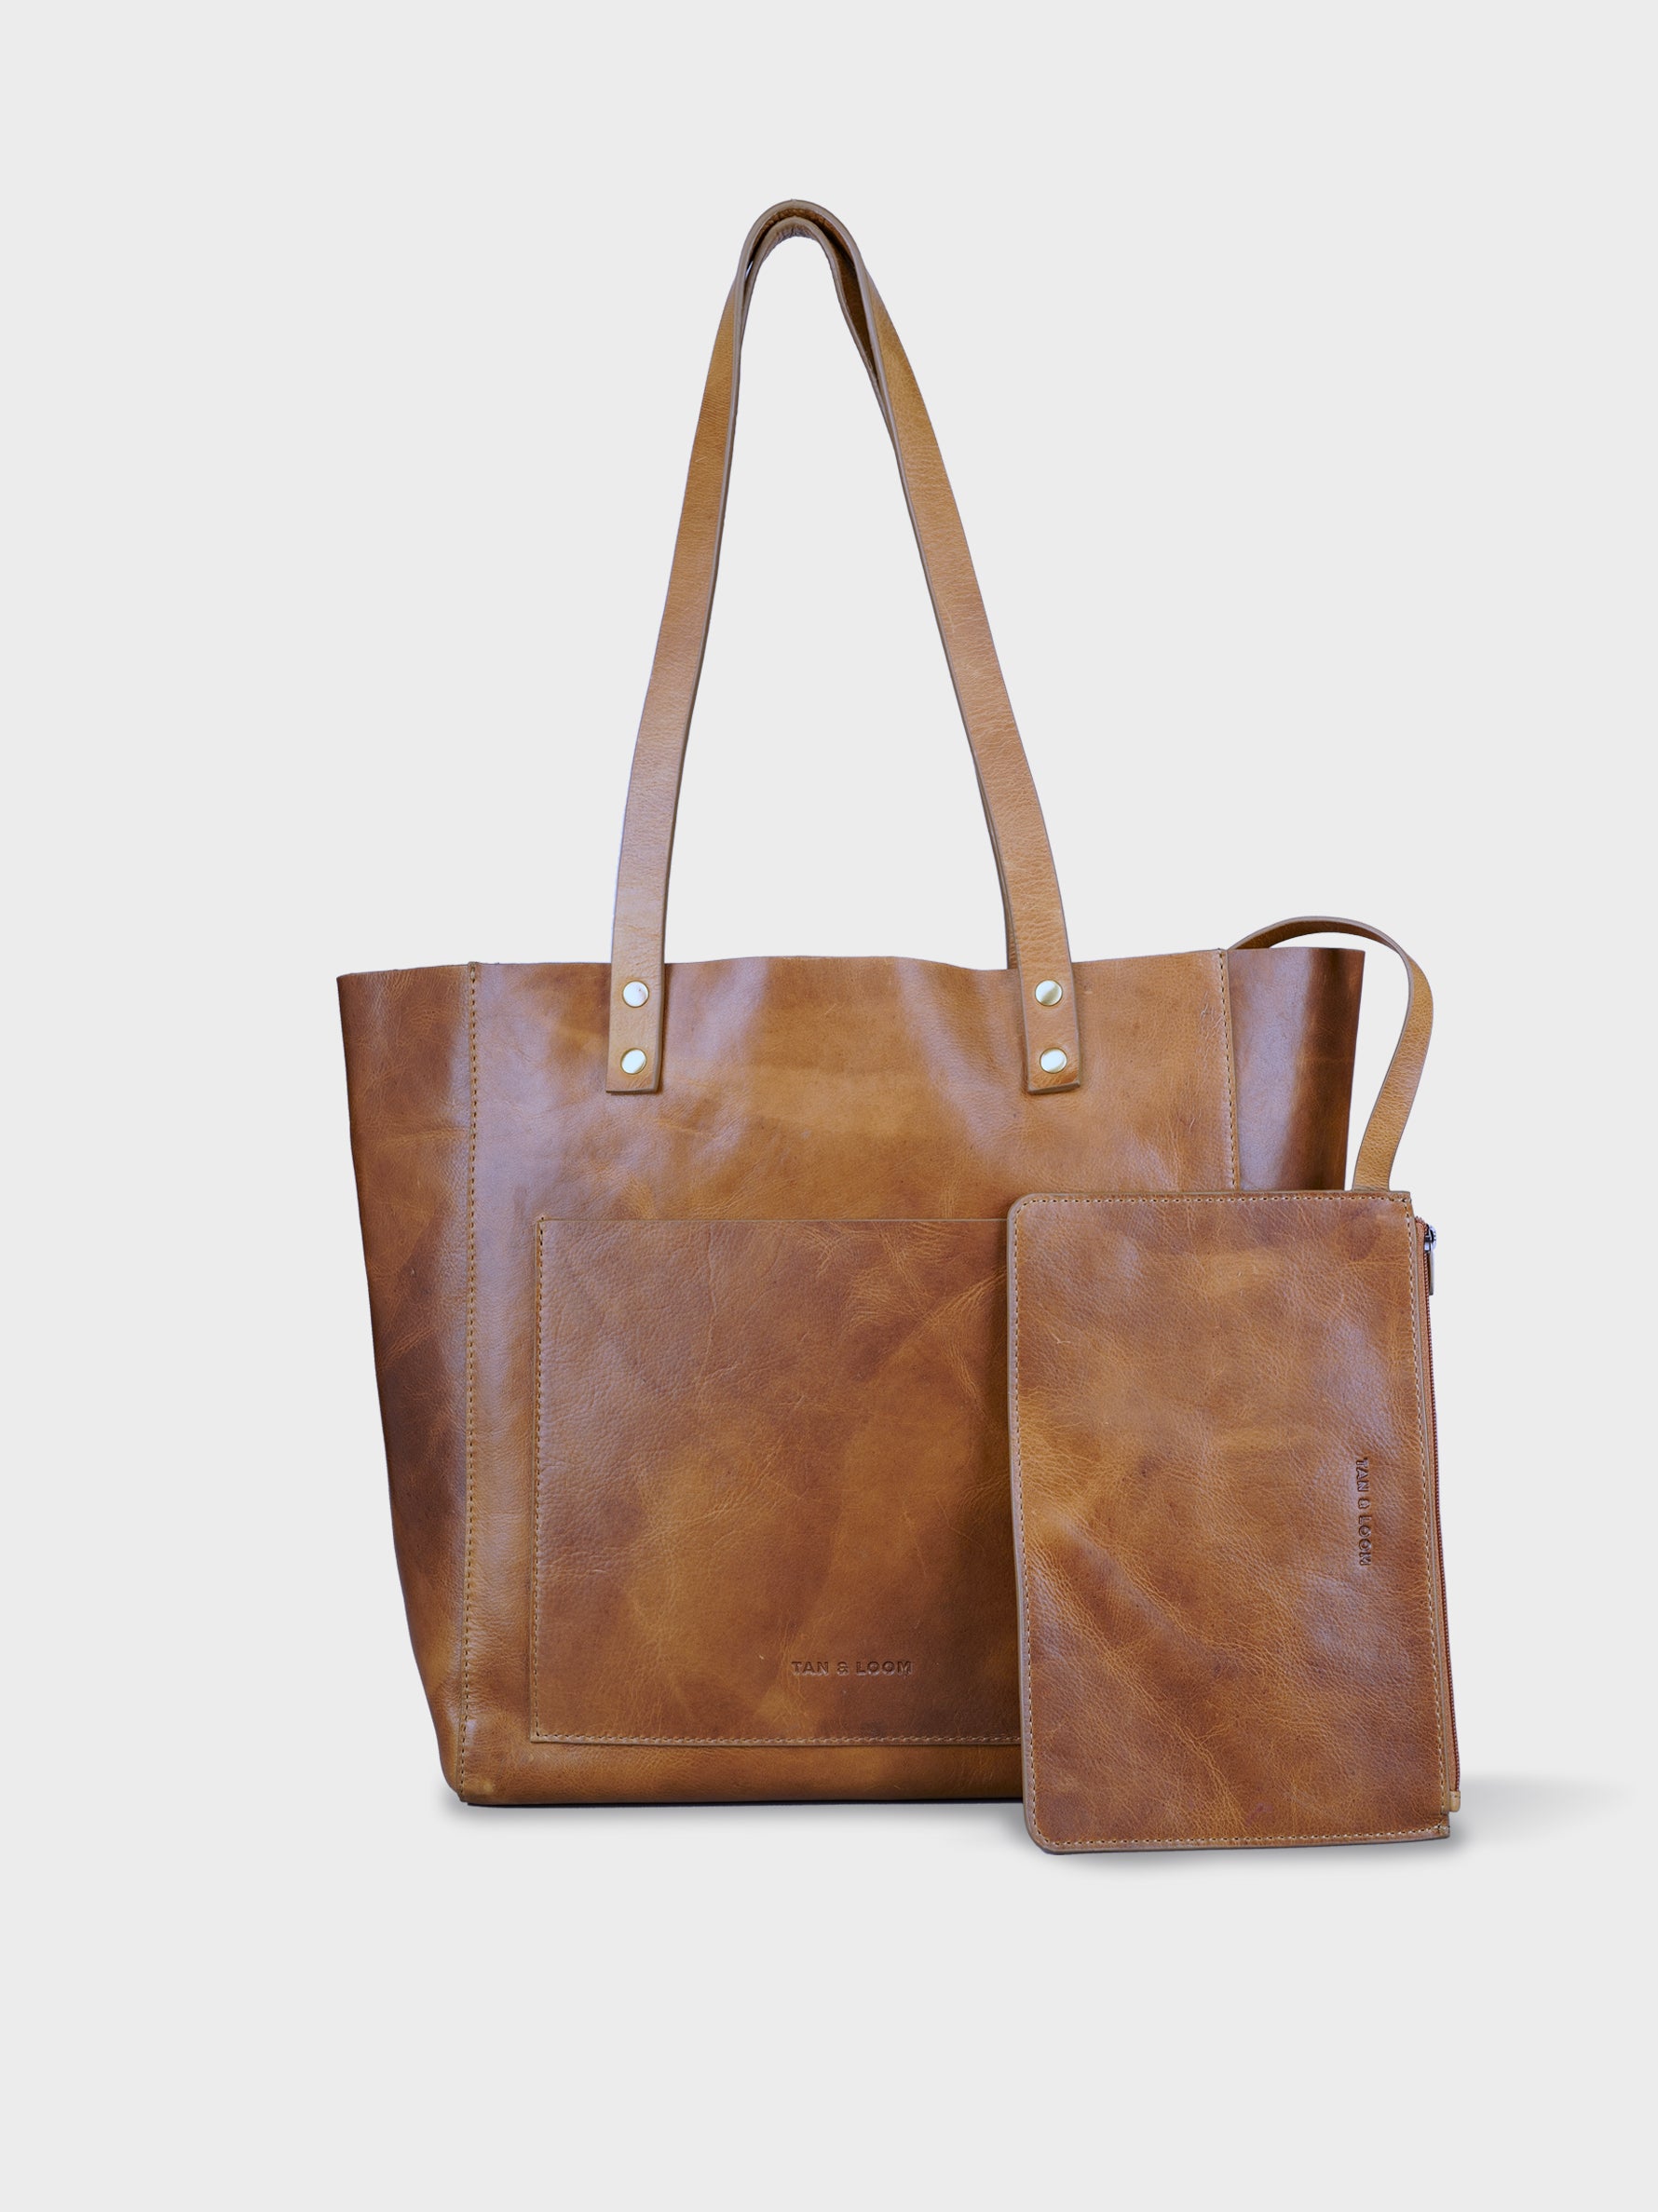 Handcrafted Genuine Vegetable Tanned Leather Old Fashioned Tote Regular Tuscany Tan for Women Tan & Loom